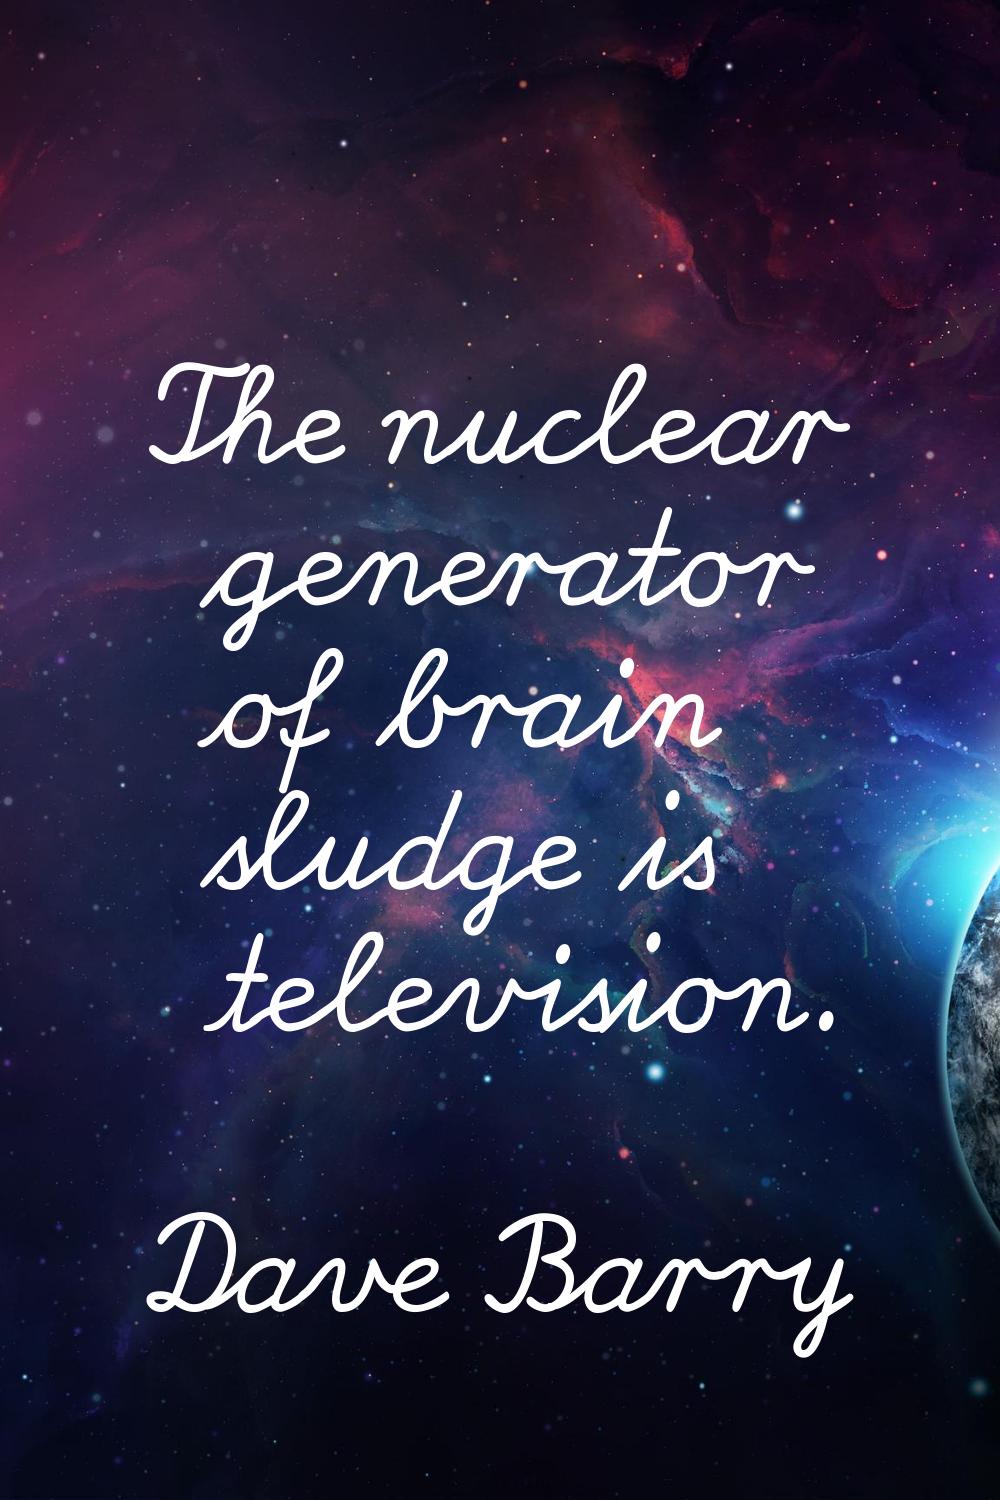 The nuclear generator of brain sludge is television.